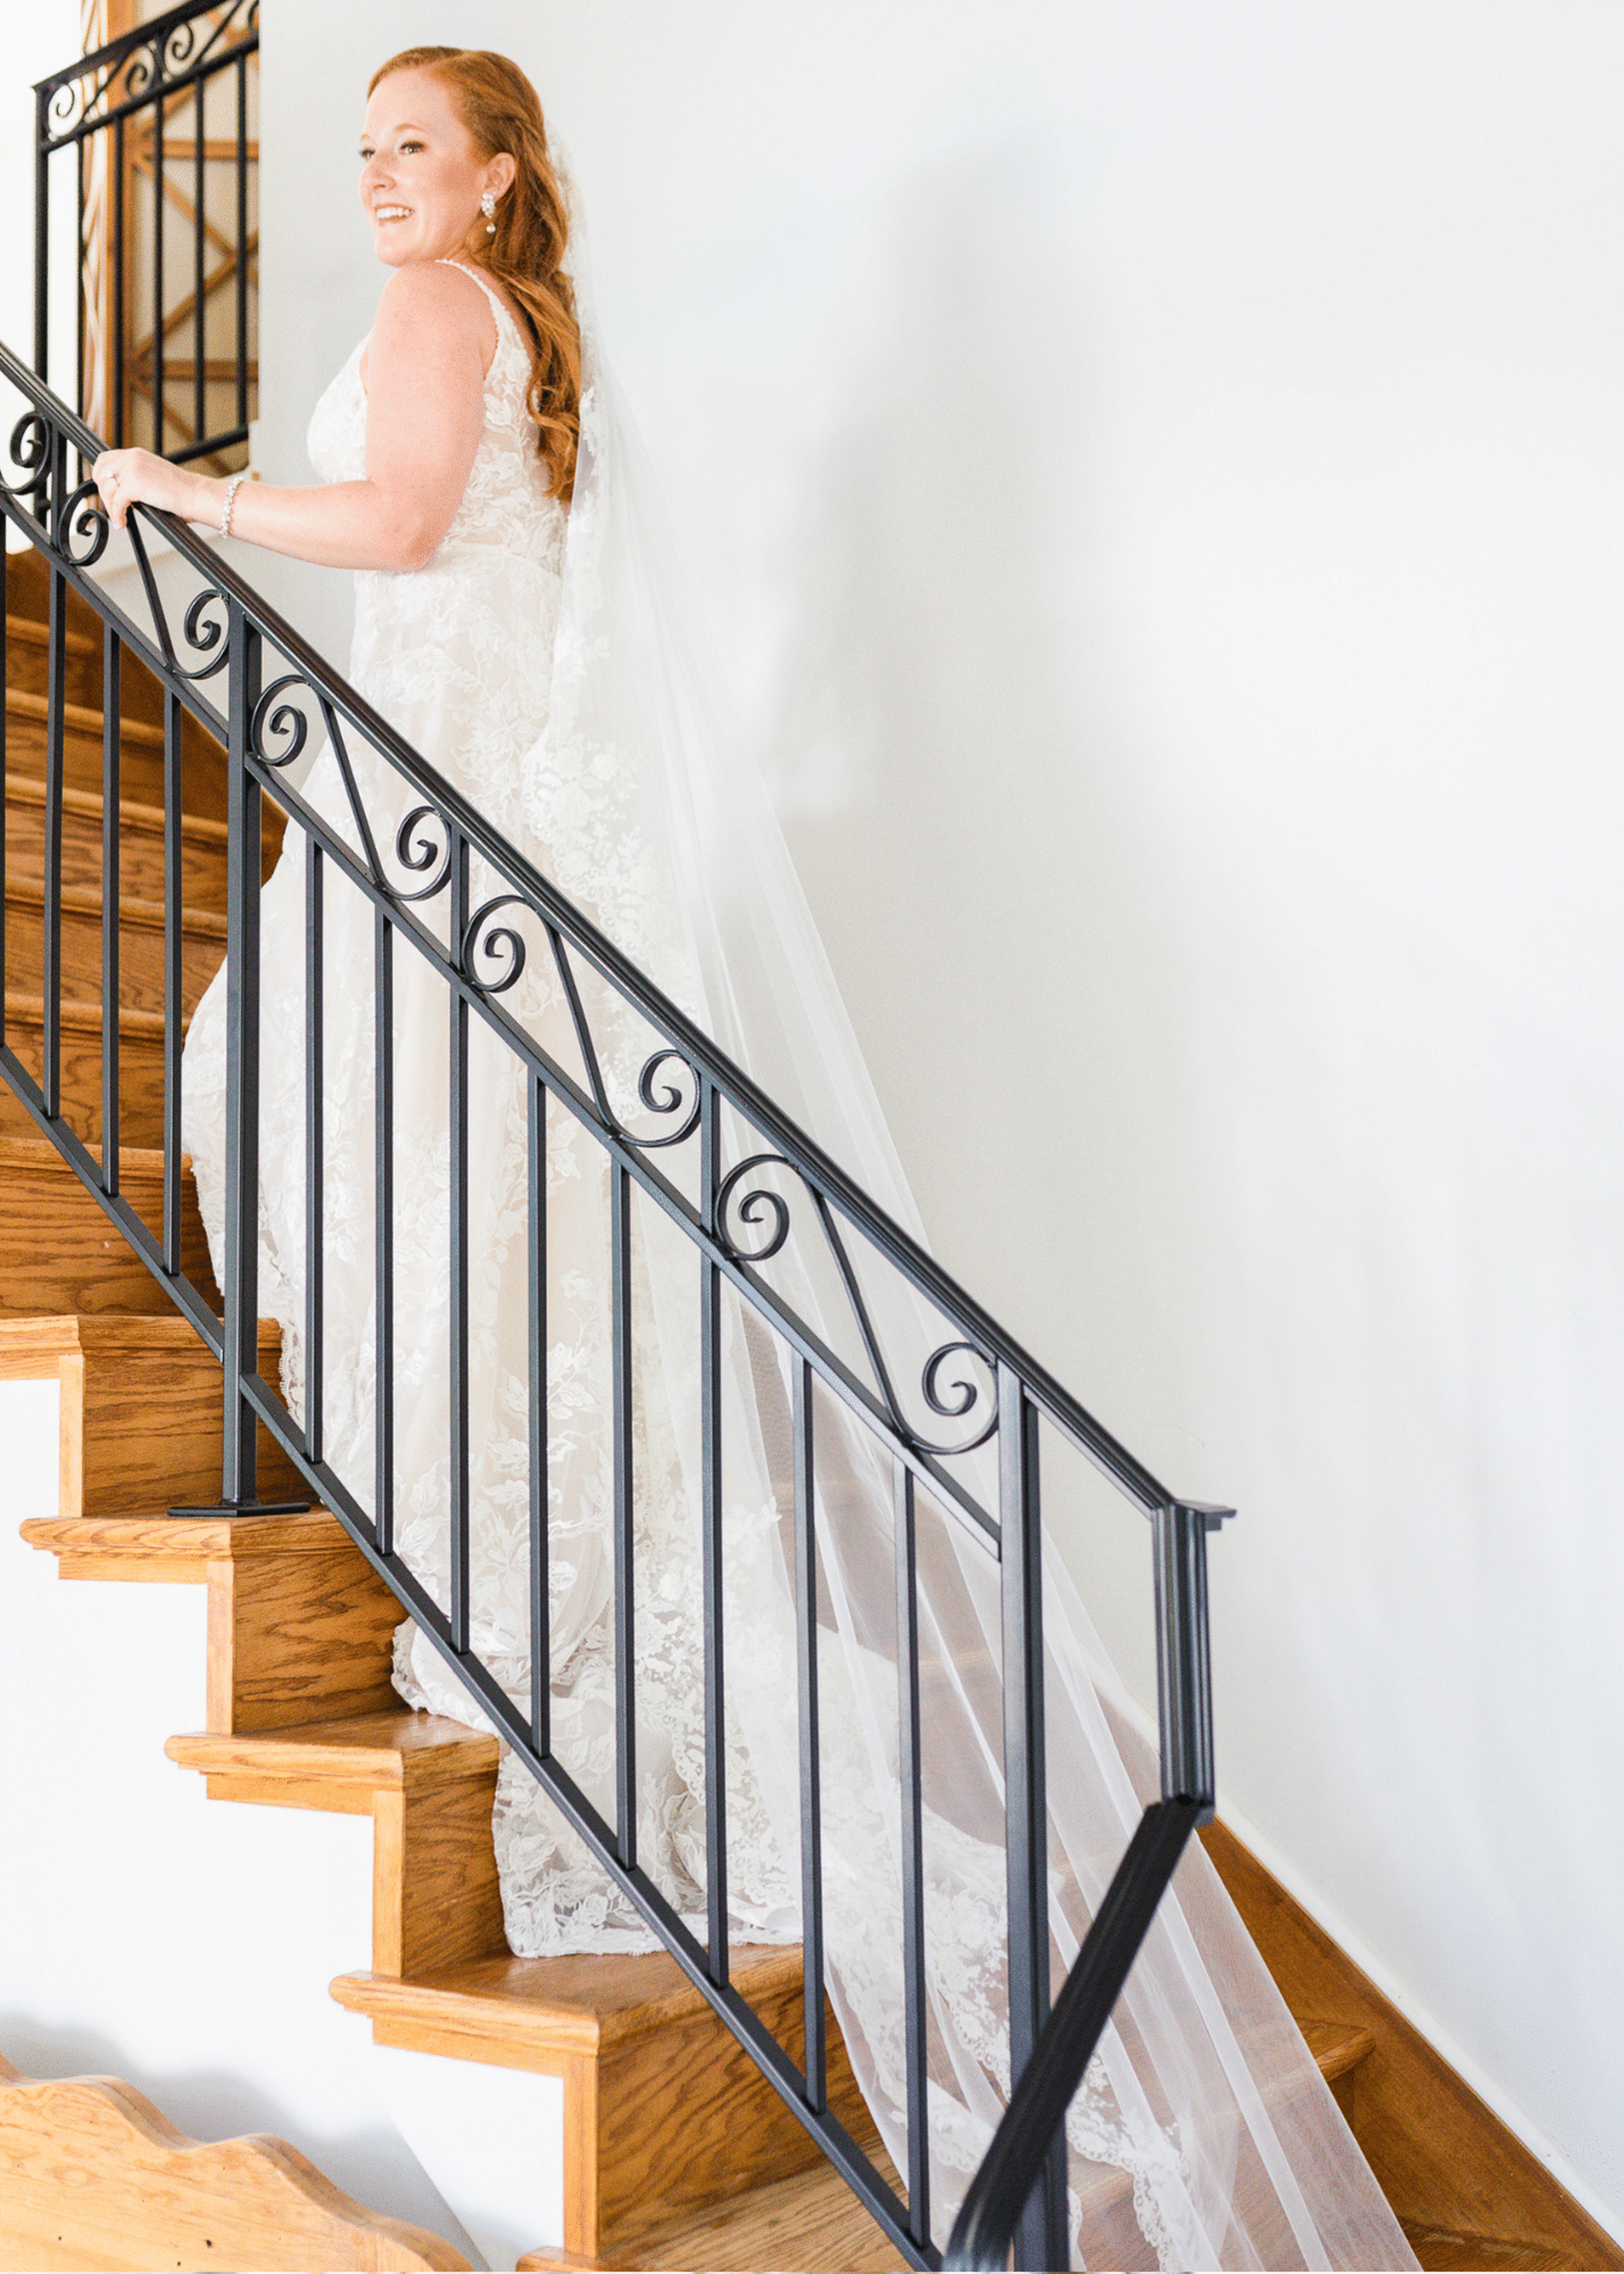 Model wearing a white gown on the stairs